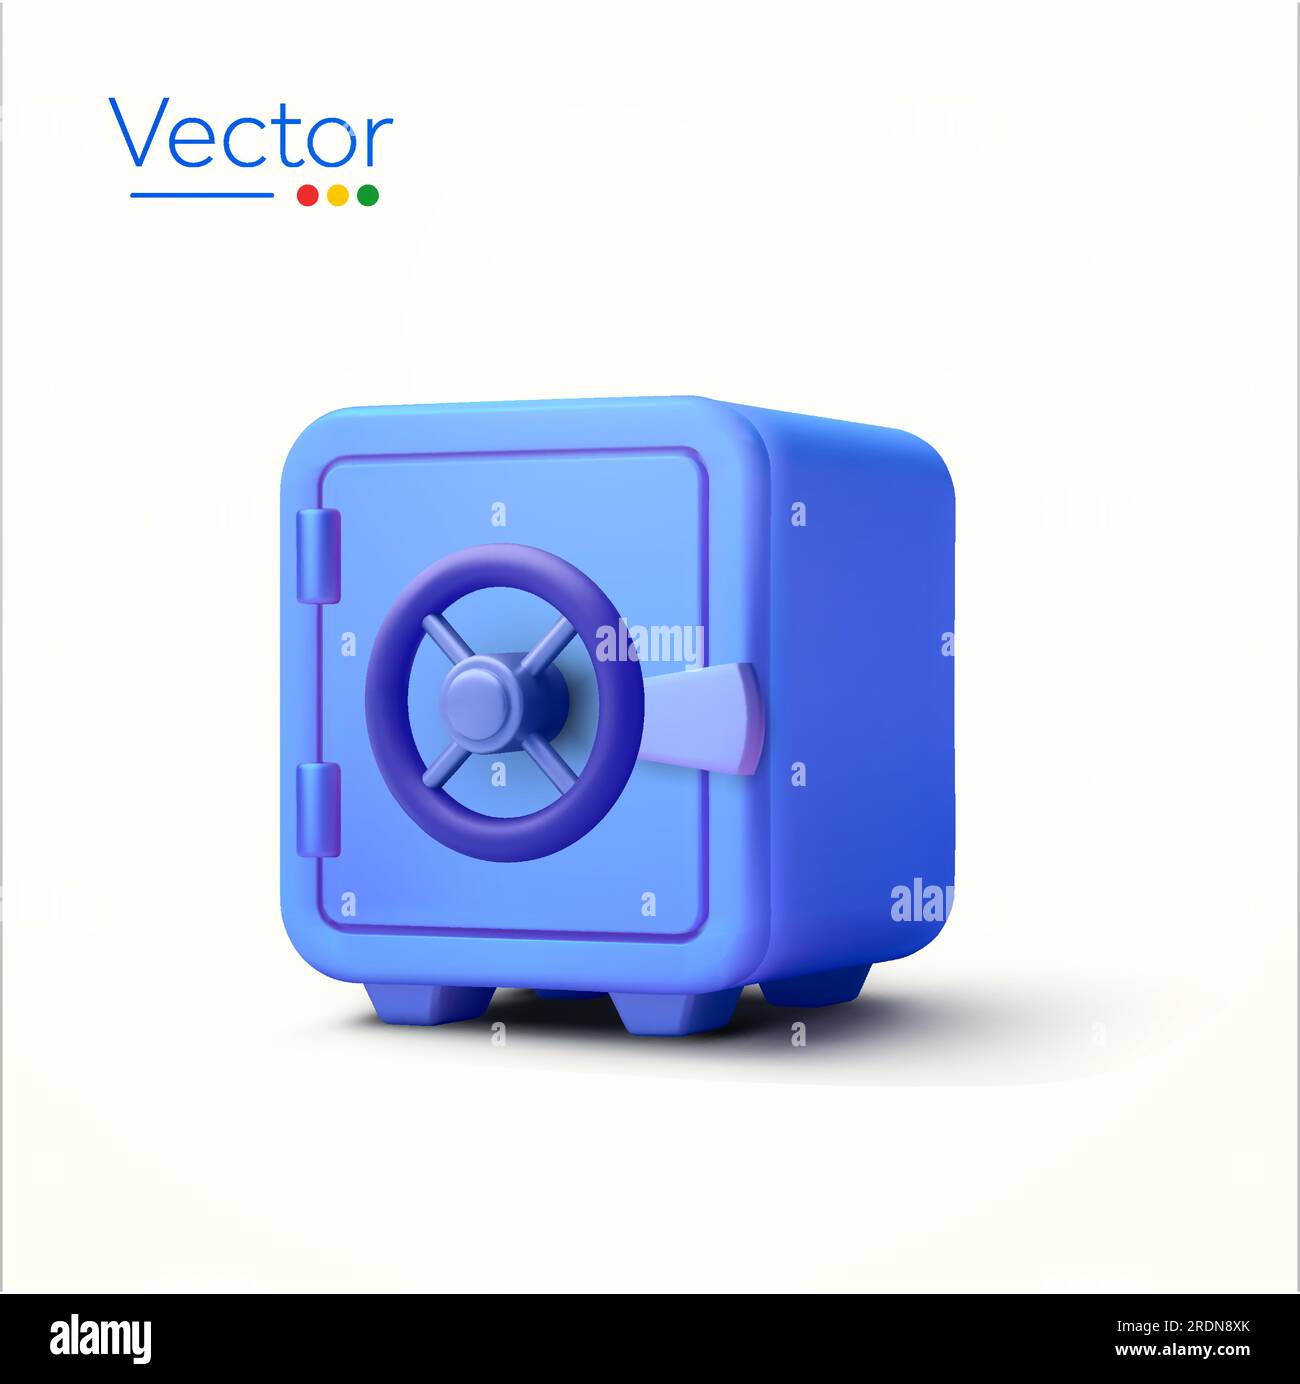 3d blue vault or Safe box in minimal style, isolated on background. Concept for saving, keeping money, bank, storage, secured. 3d vector illustration. Vector illustration Stock Vector